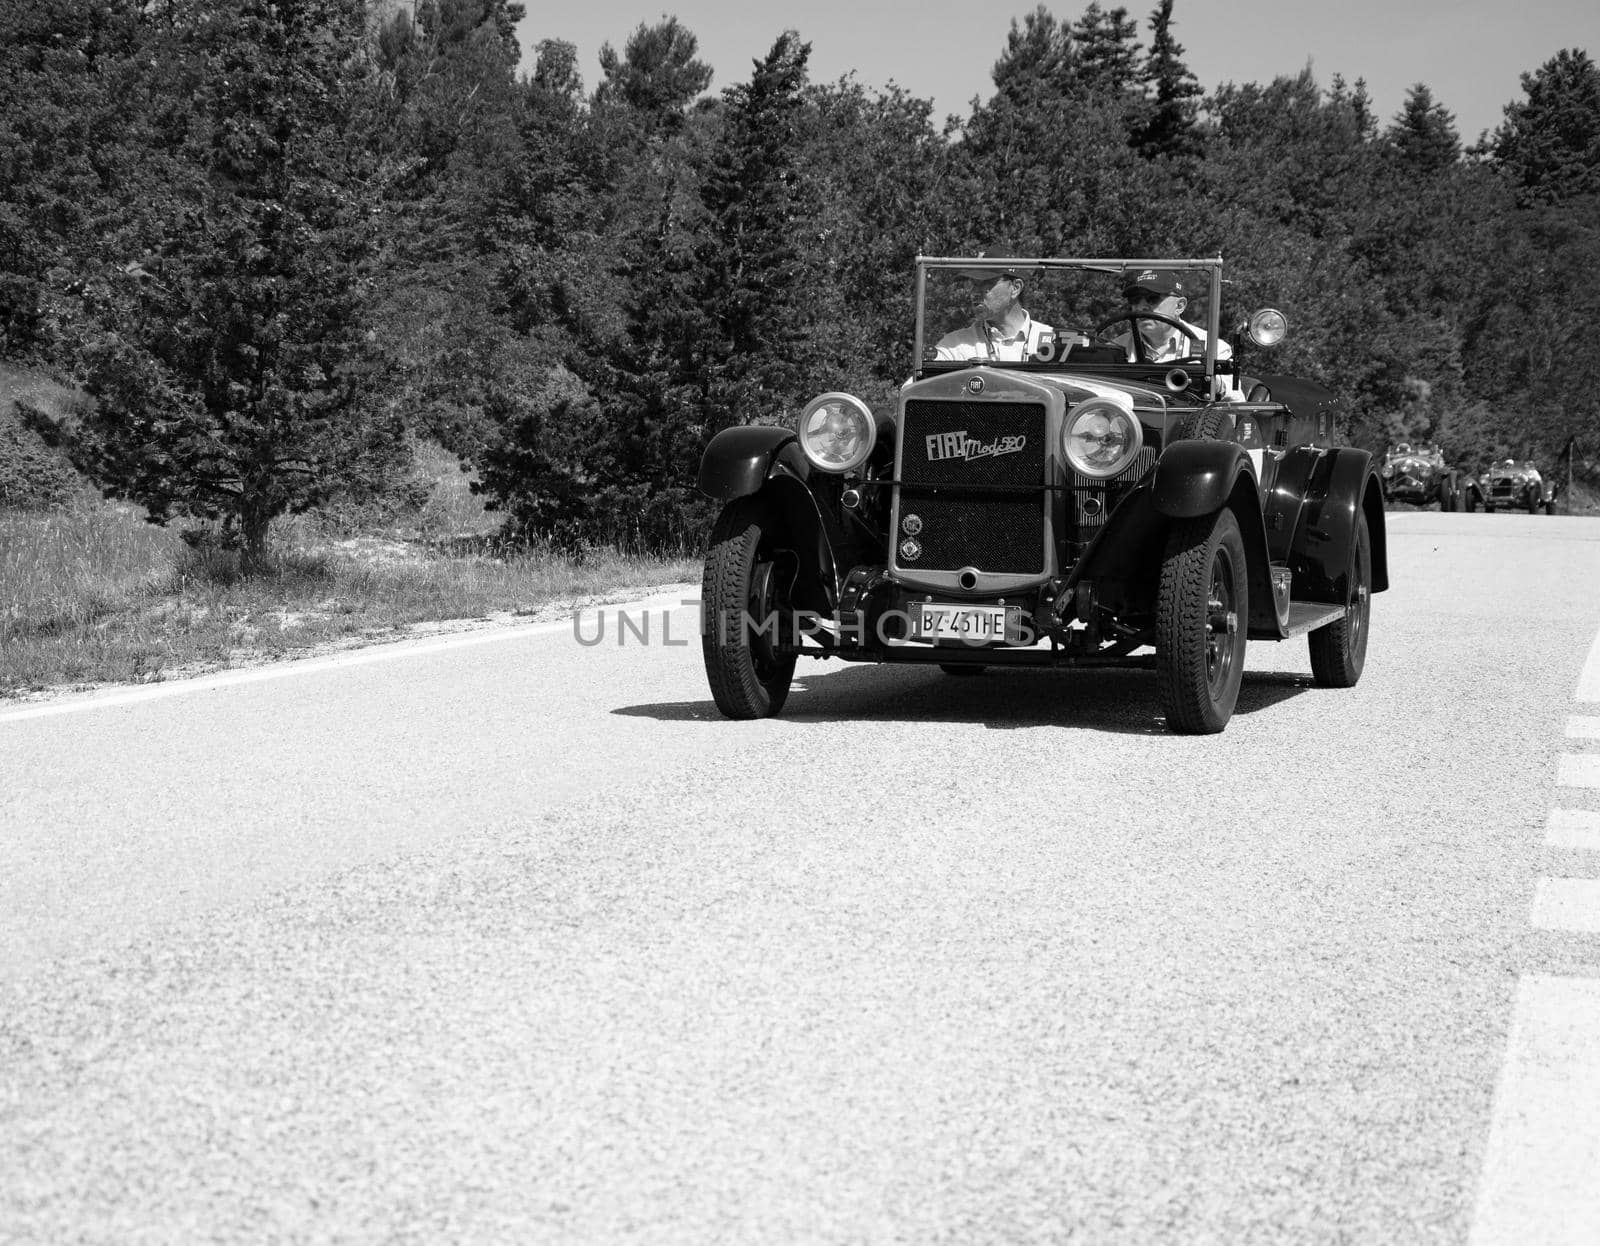 FIAT 520 1929 on an old racing car in rally Mille Miglia 2022 the famous italian historical race (1927-1957 by massimocampanari